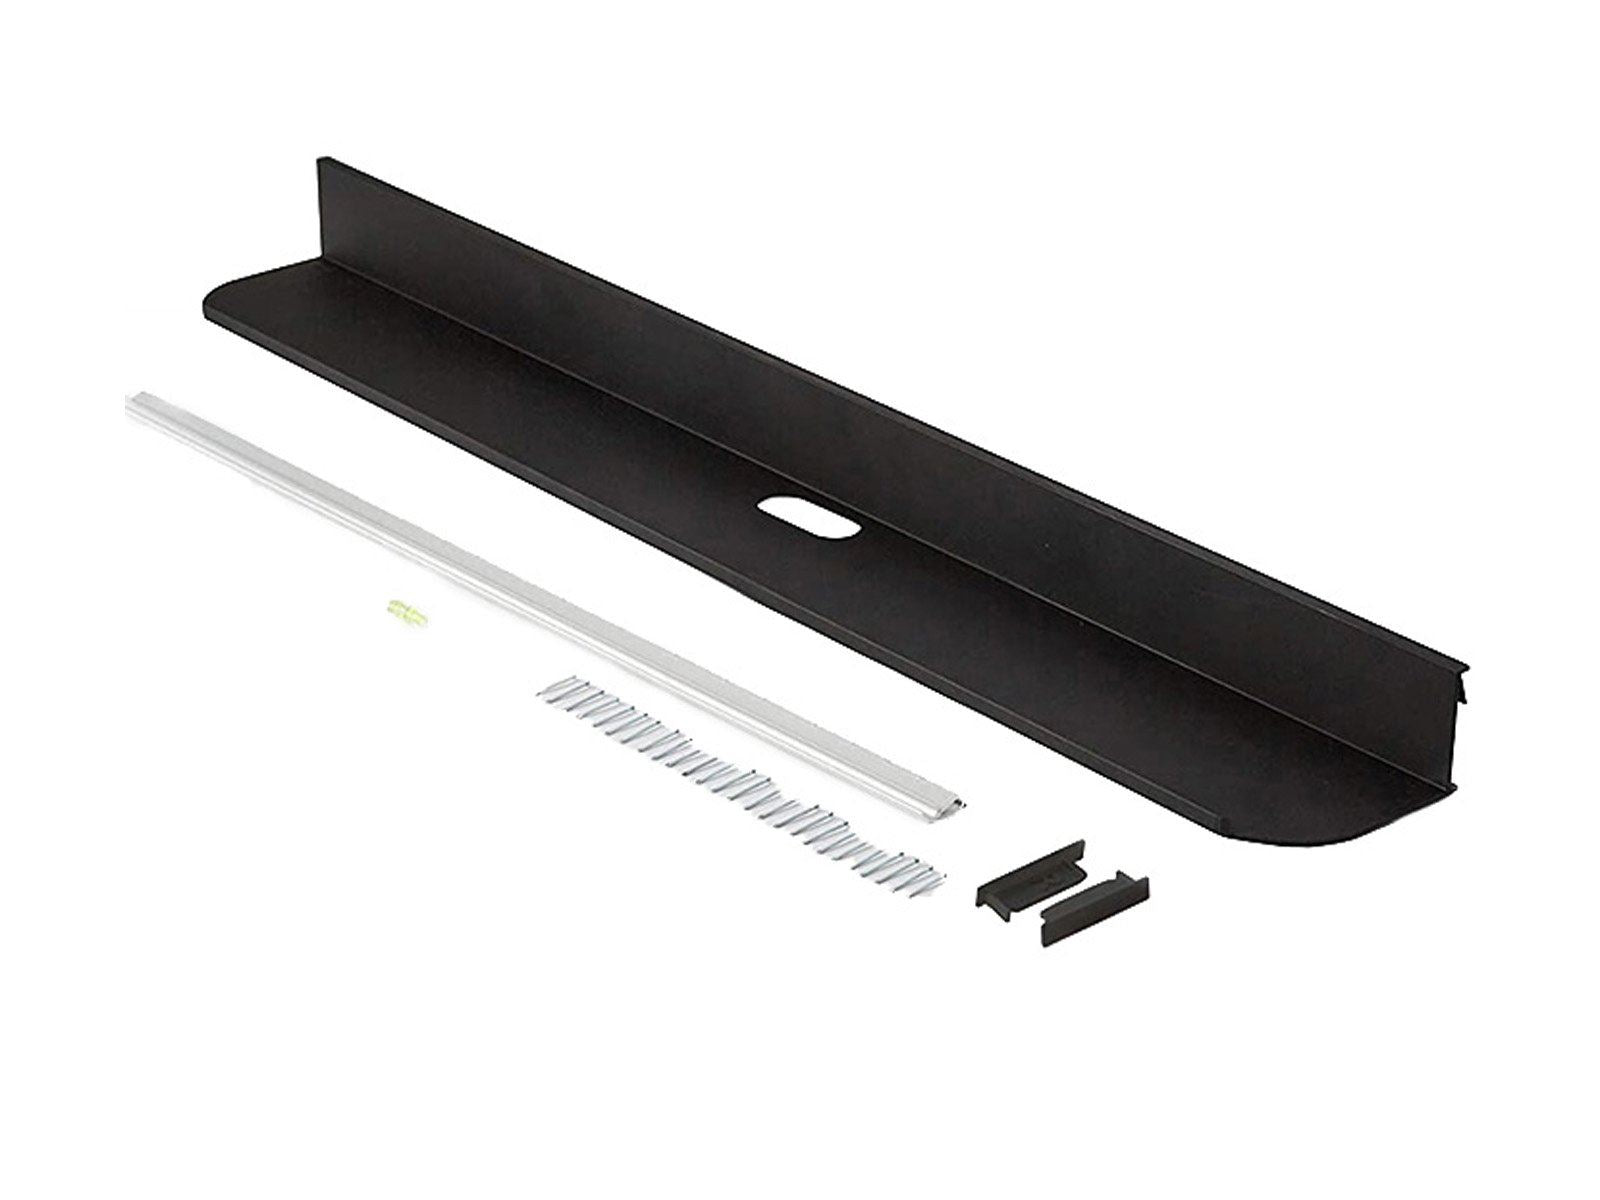 Hangman No Stud Sound Bar Shelf With All Included Fixings